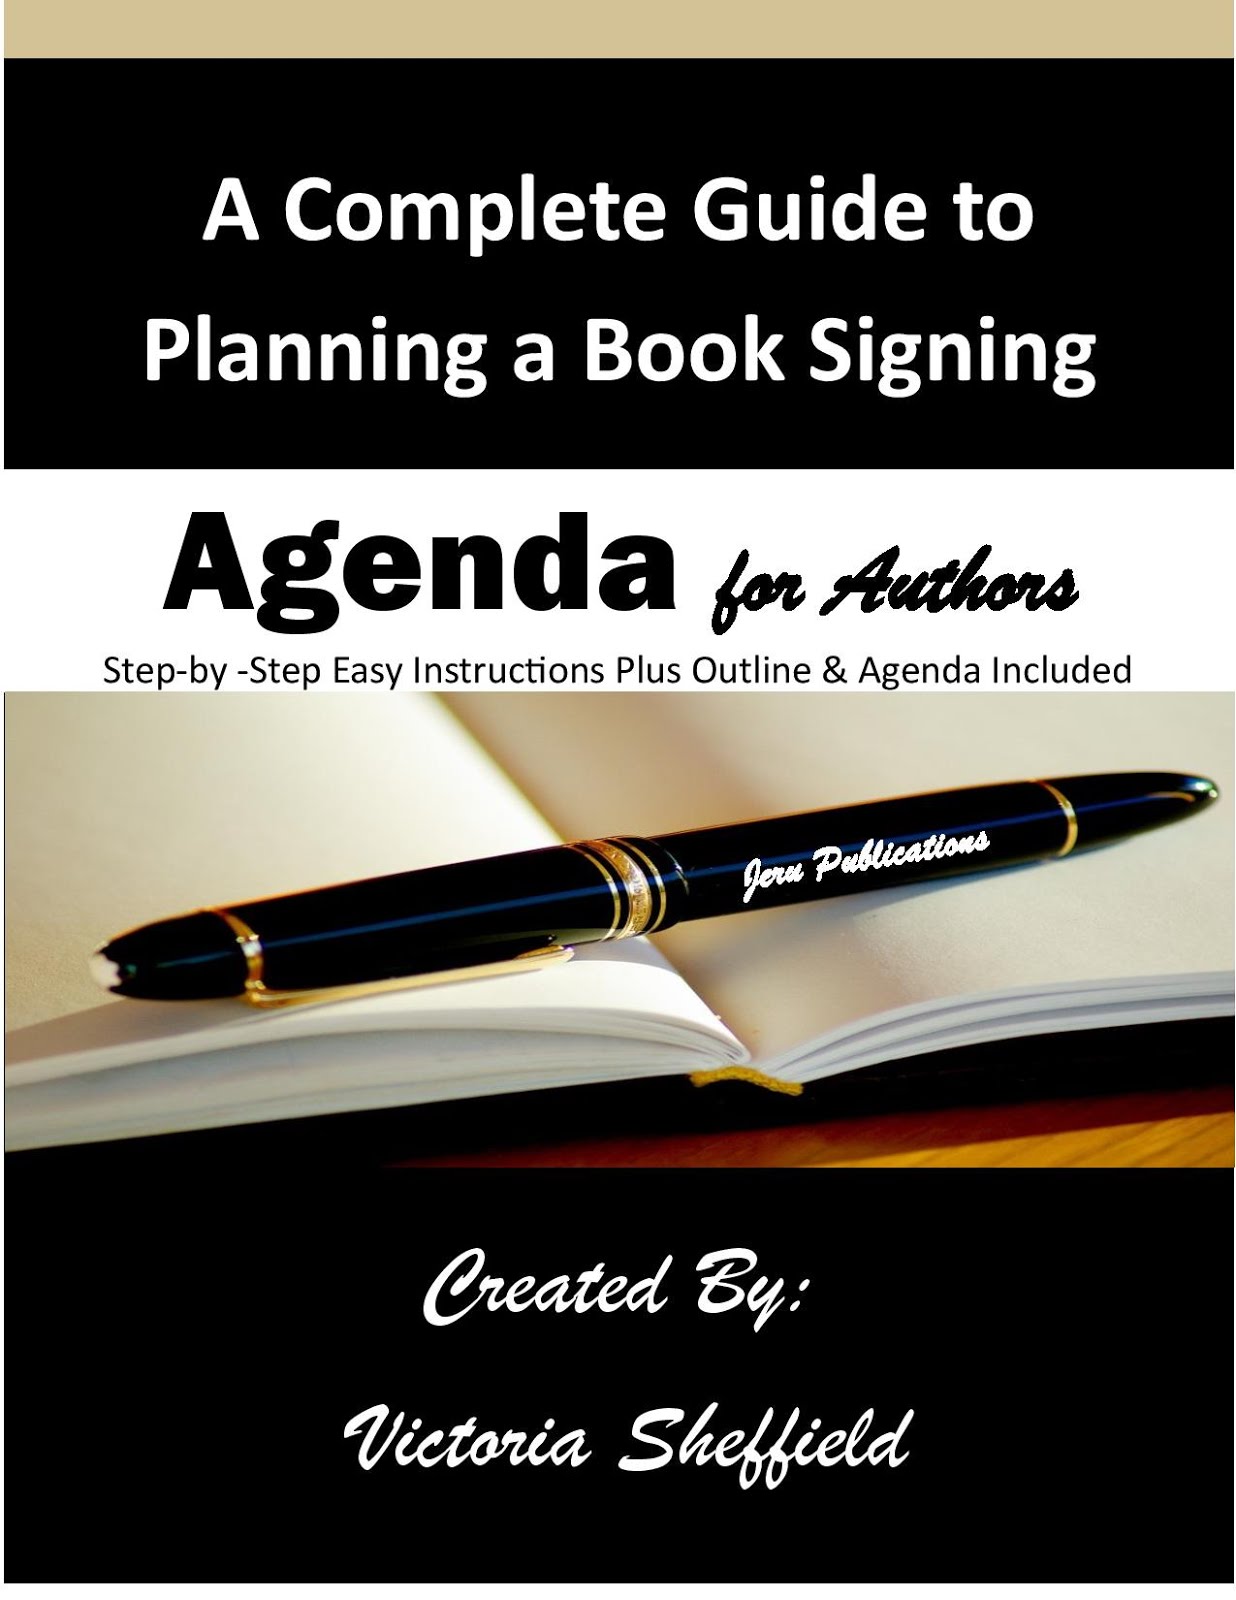 Learn how to plan the perfect book signing.